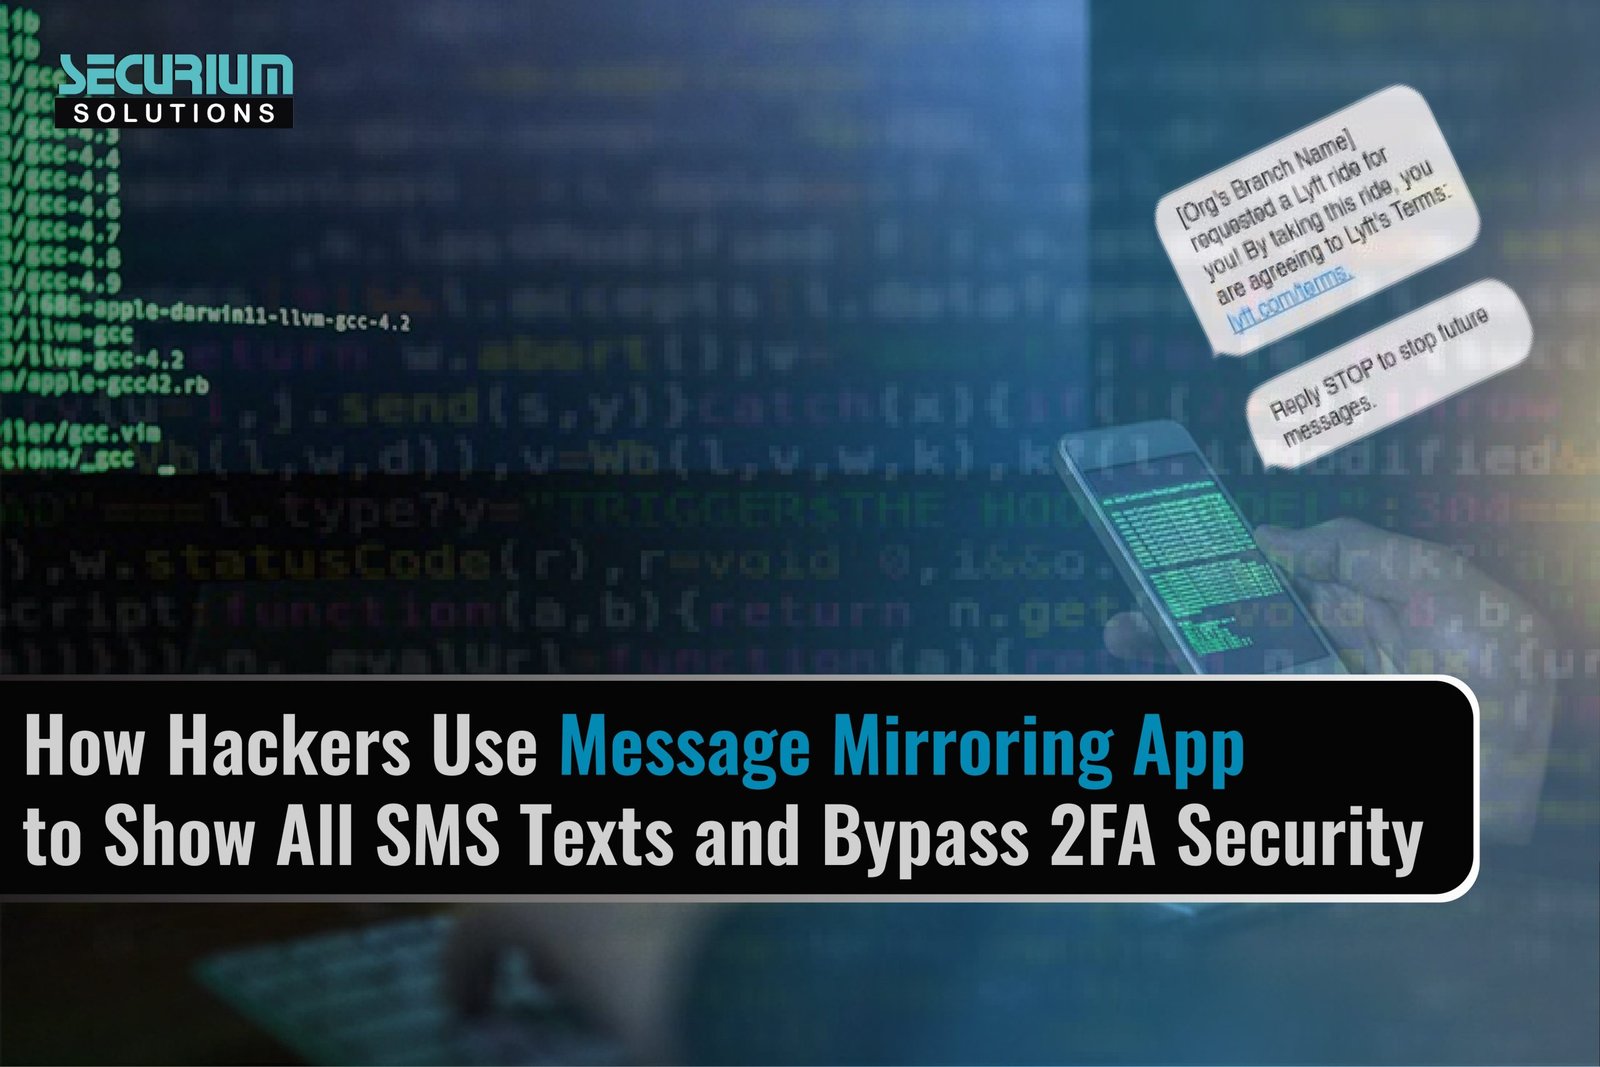 How Hackers Use Message Mirroring App to Show All SMS Texts and Bypass 2FA Security - Securium Solutions